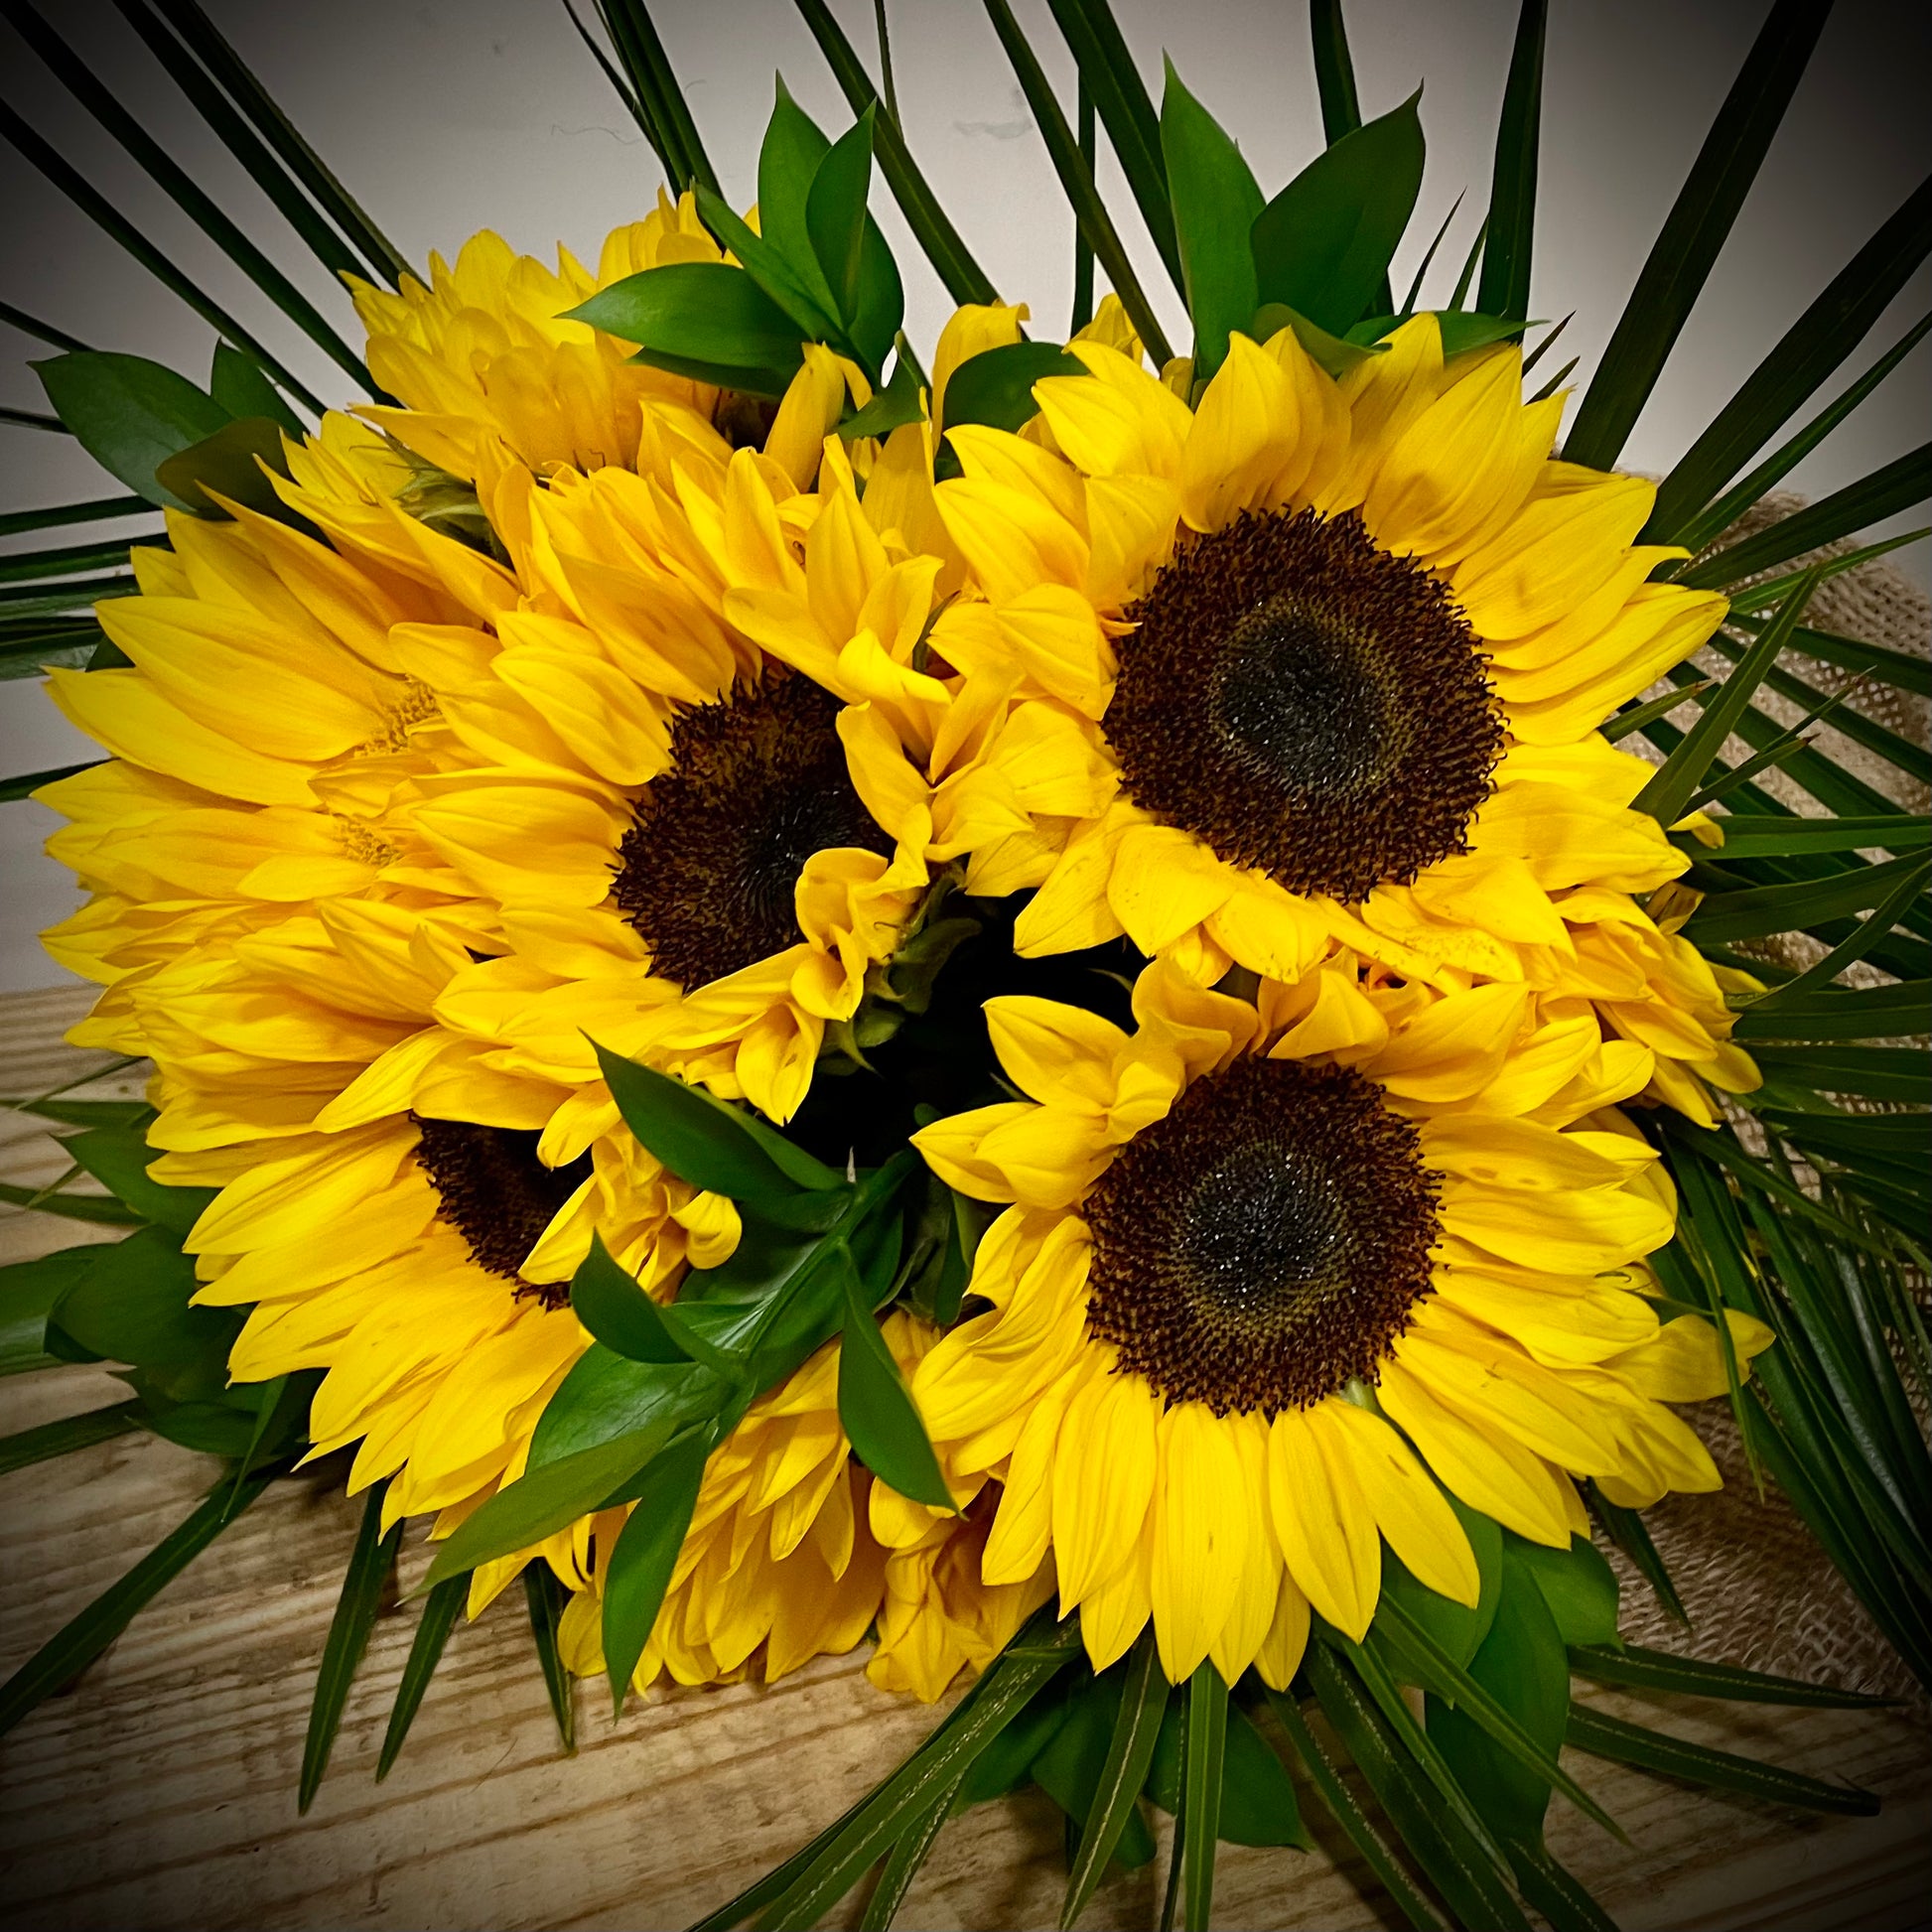 Close-up view of the 'Sunny Day' product displaying a group of sunflowers